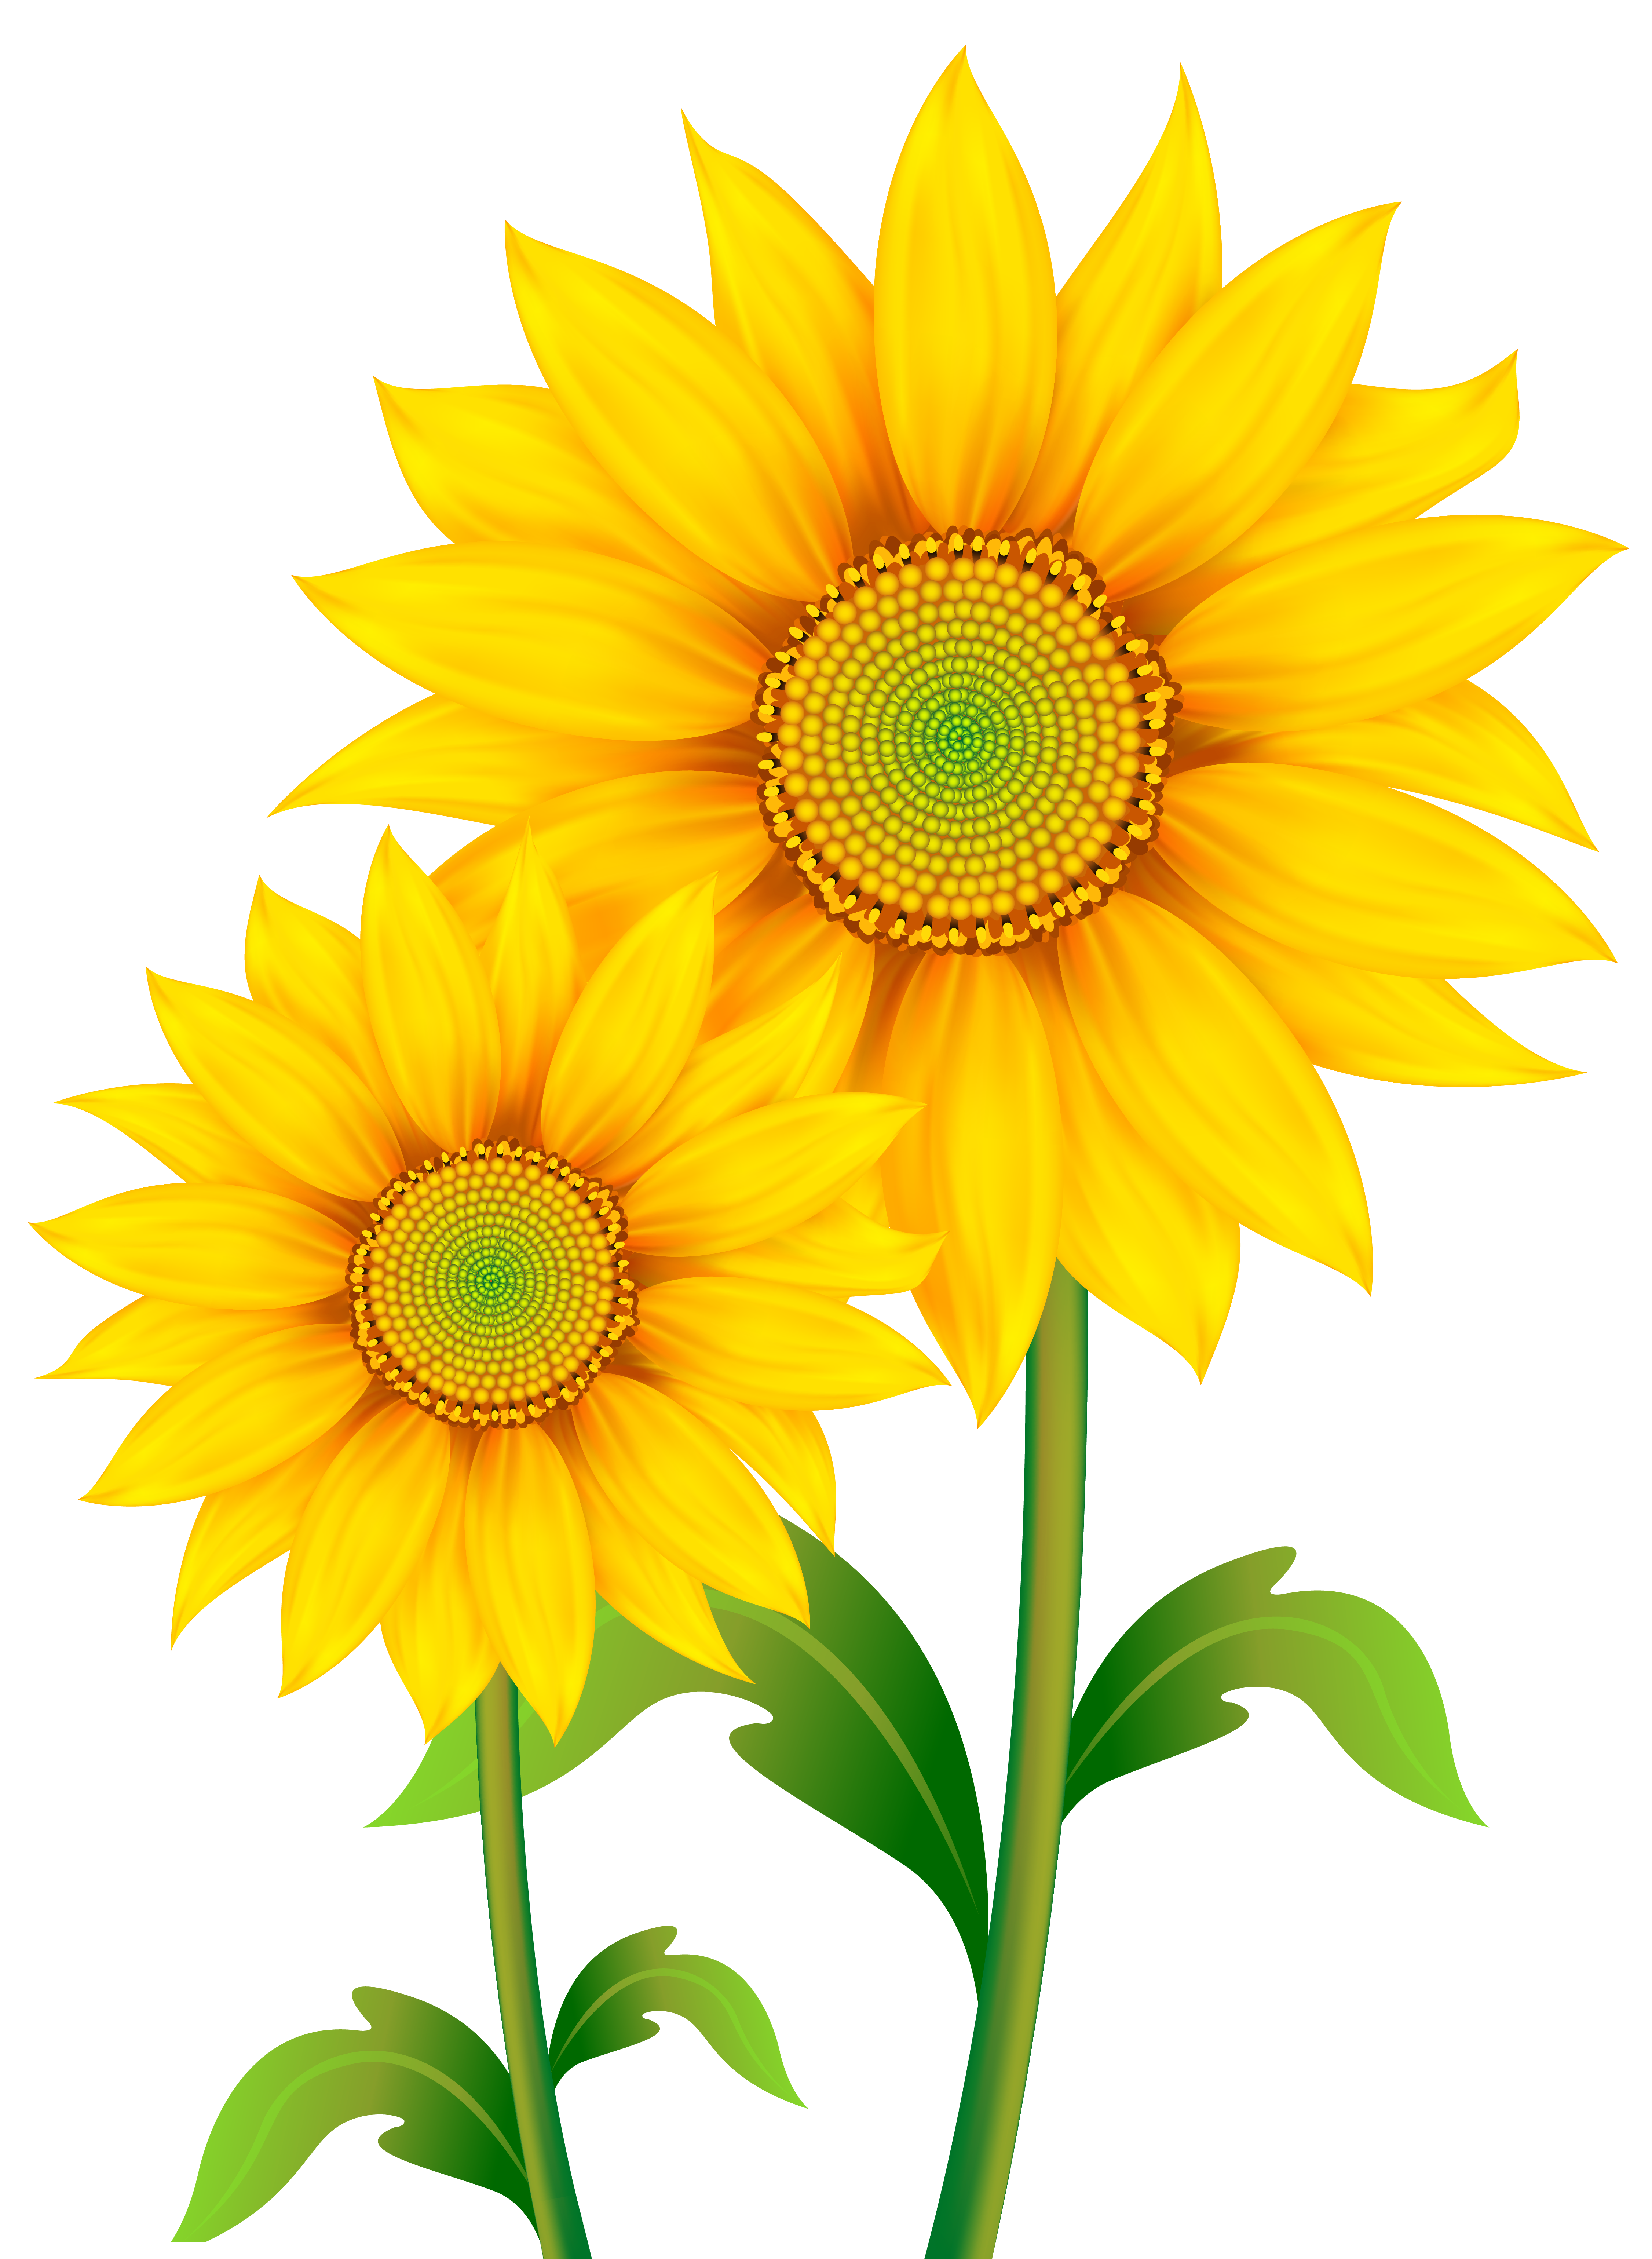 Transparent Sunflowers Clipart PNG Image | Gallery Yopriceville - High